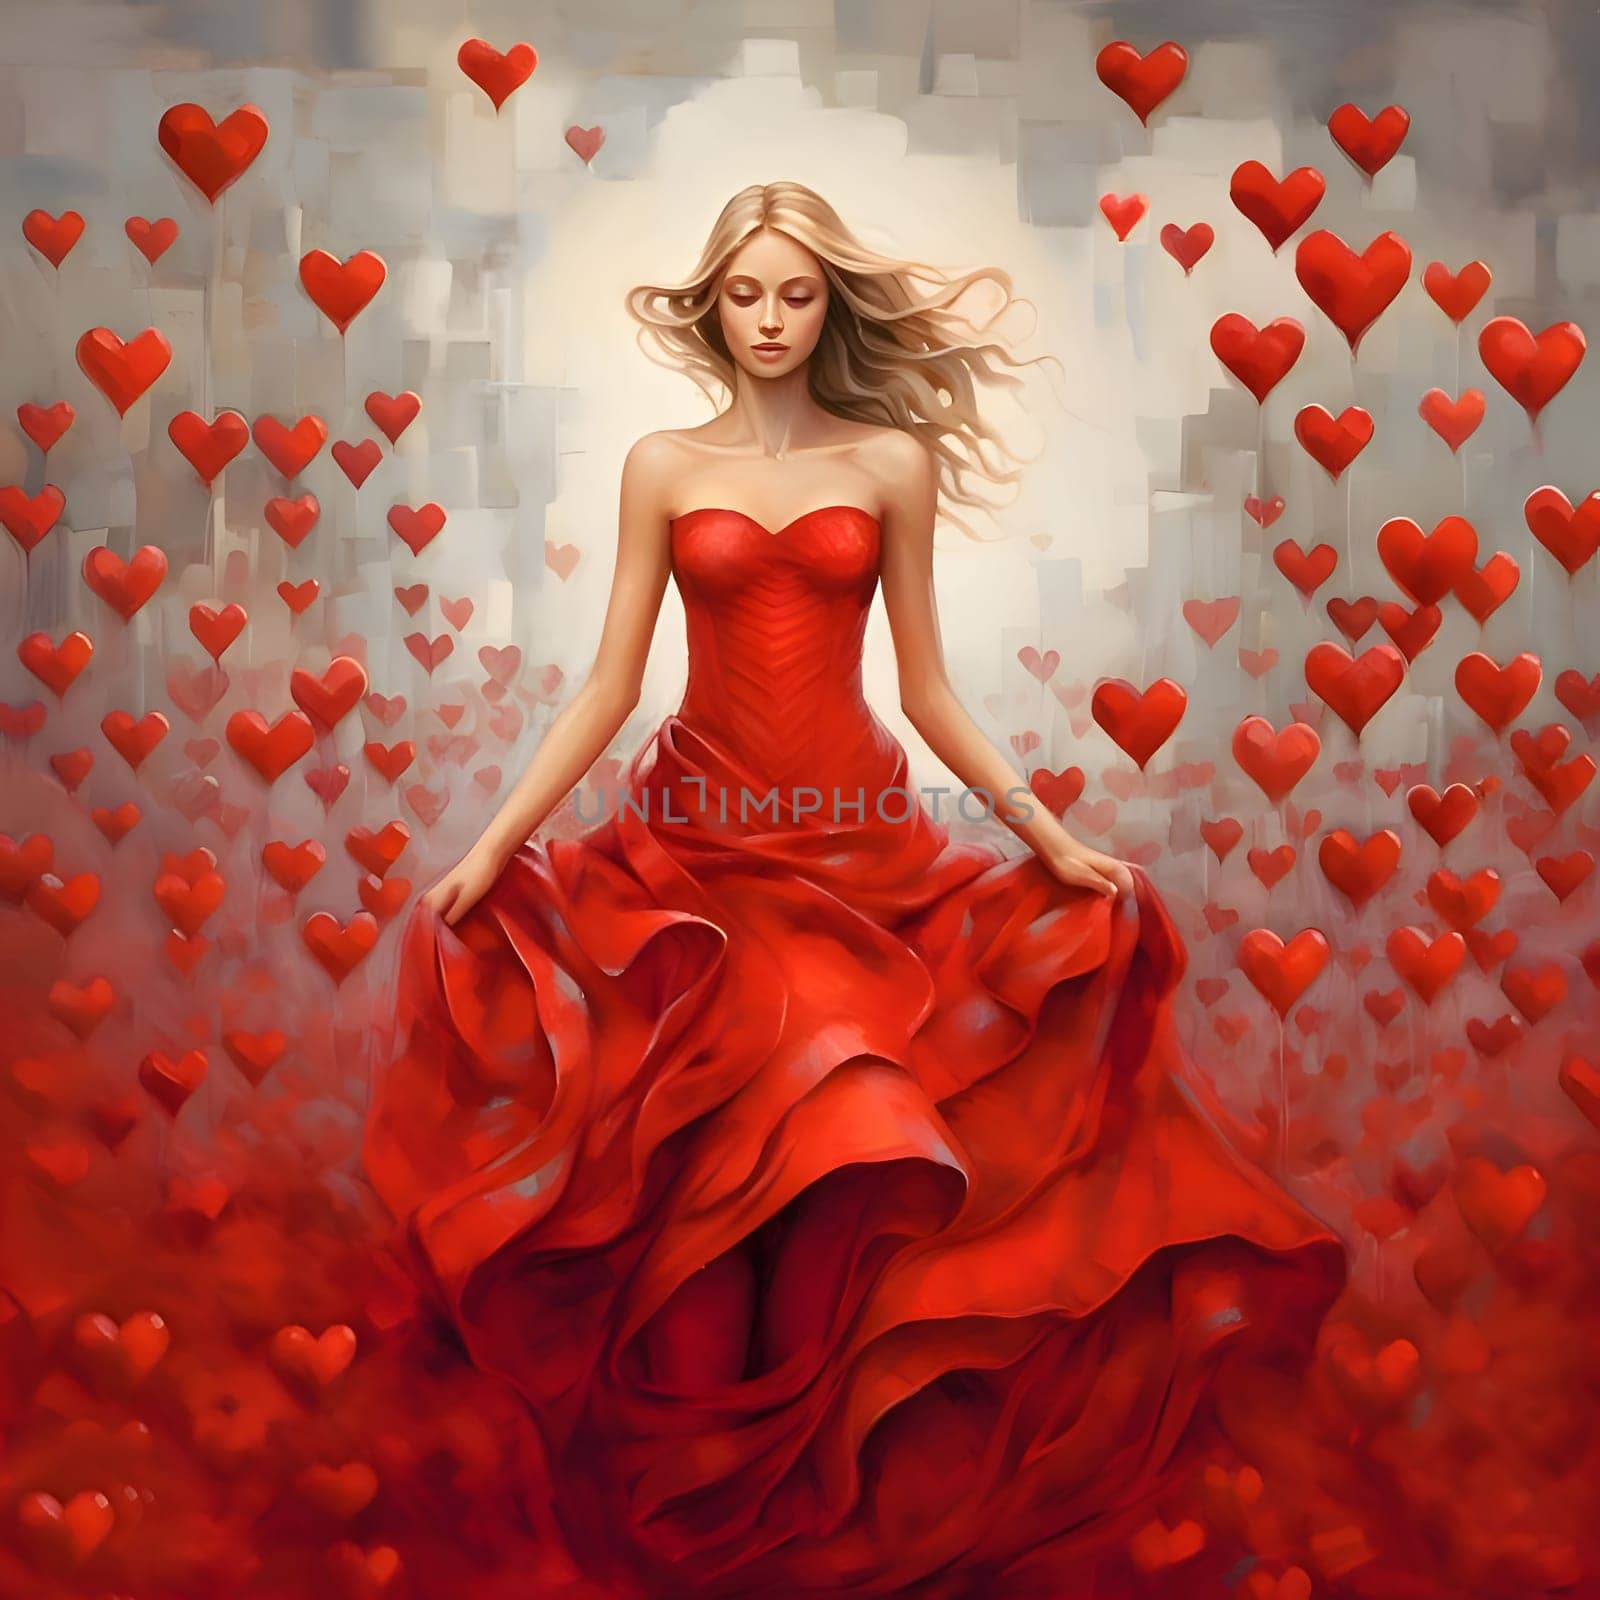 Blonde woman in red dress around rising red hearts. Heart as a symbol of affection and love. The time of falling in love and love.